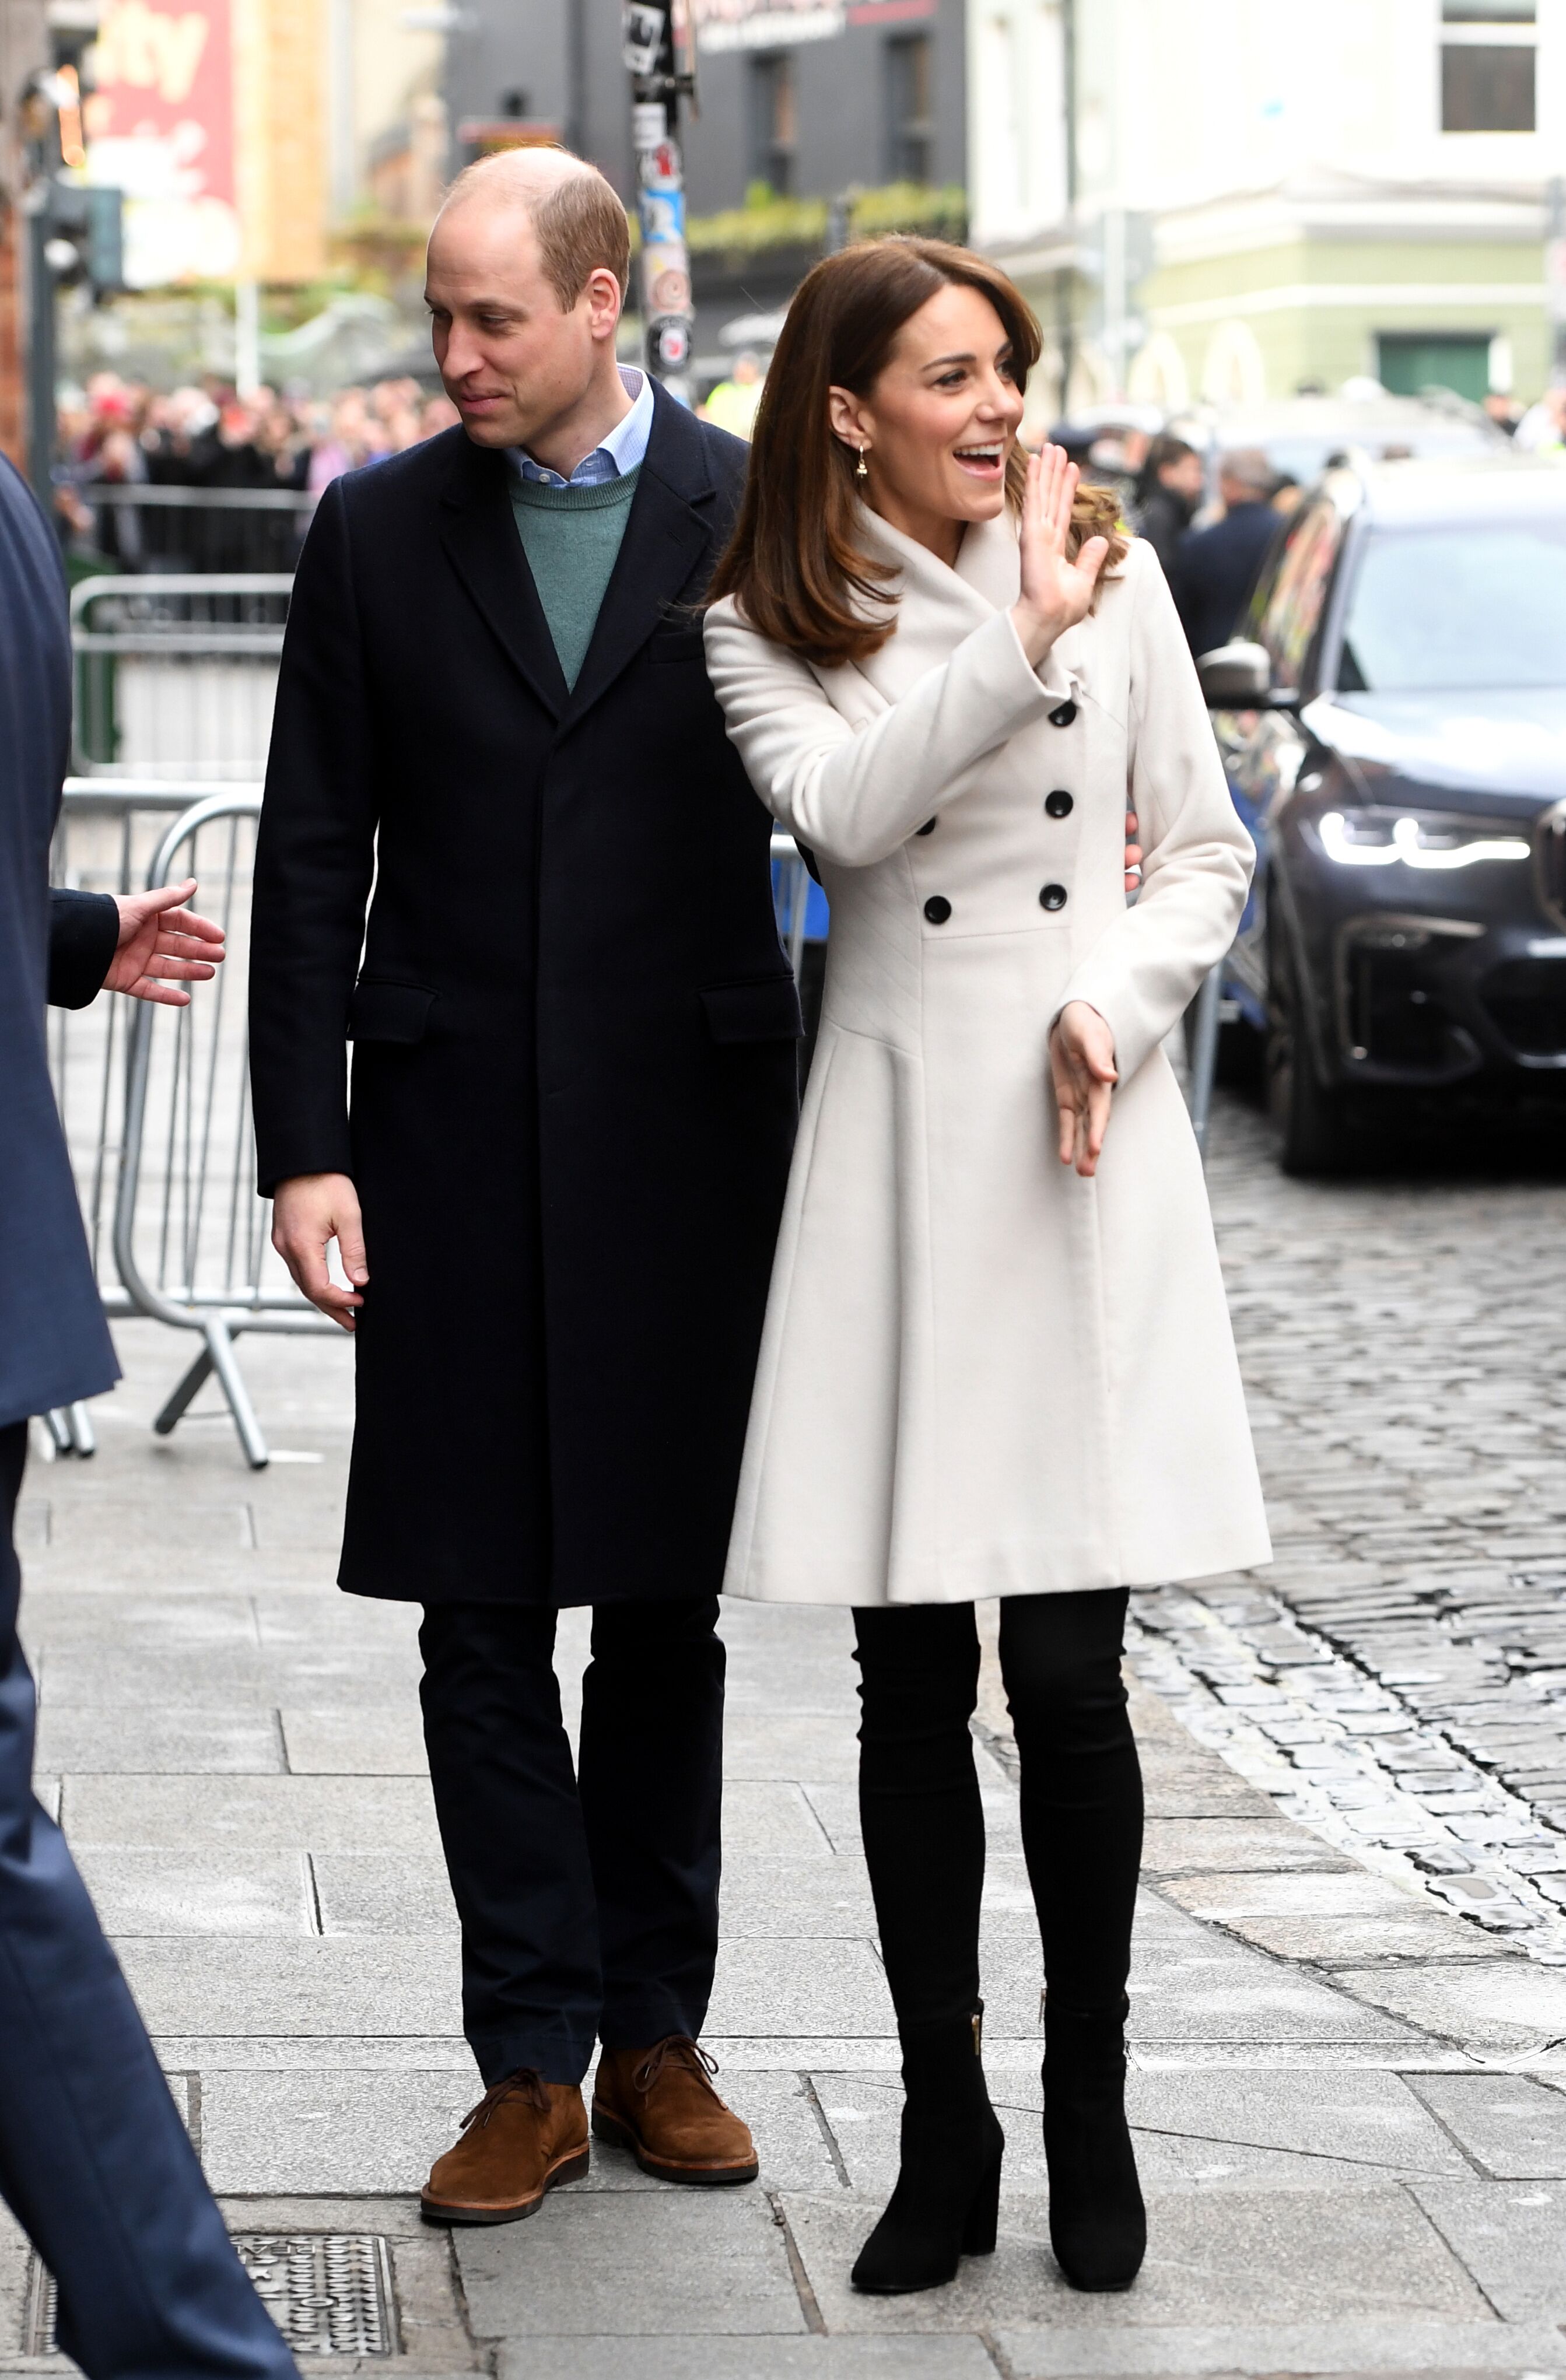 Prince William and Duchess Kate visit Jigsaw during day two of their visit to Ireland on March 04, 2020, in Dublin | Photo: Facundo Arrizabalaga/Pool/Samir Hussein/WireImage